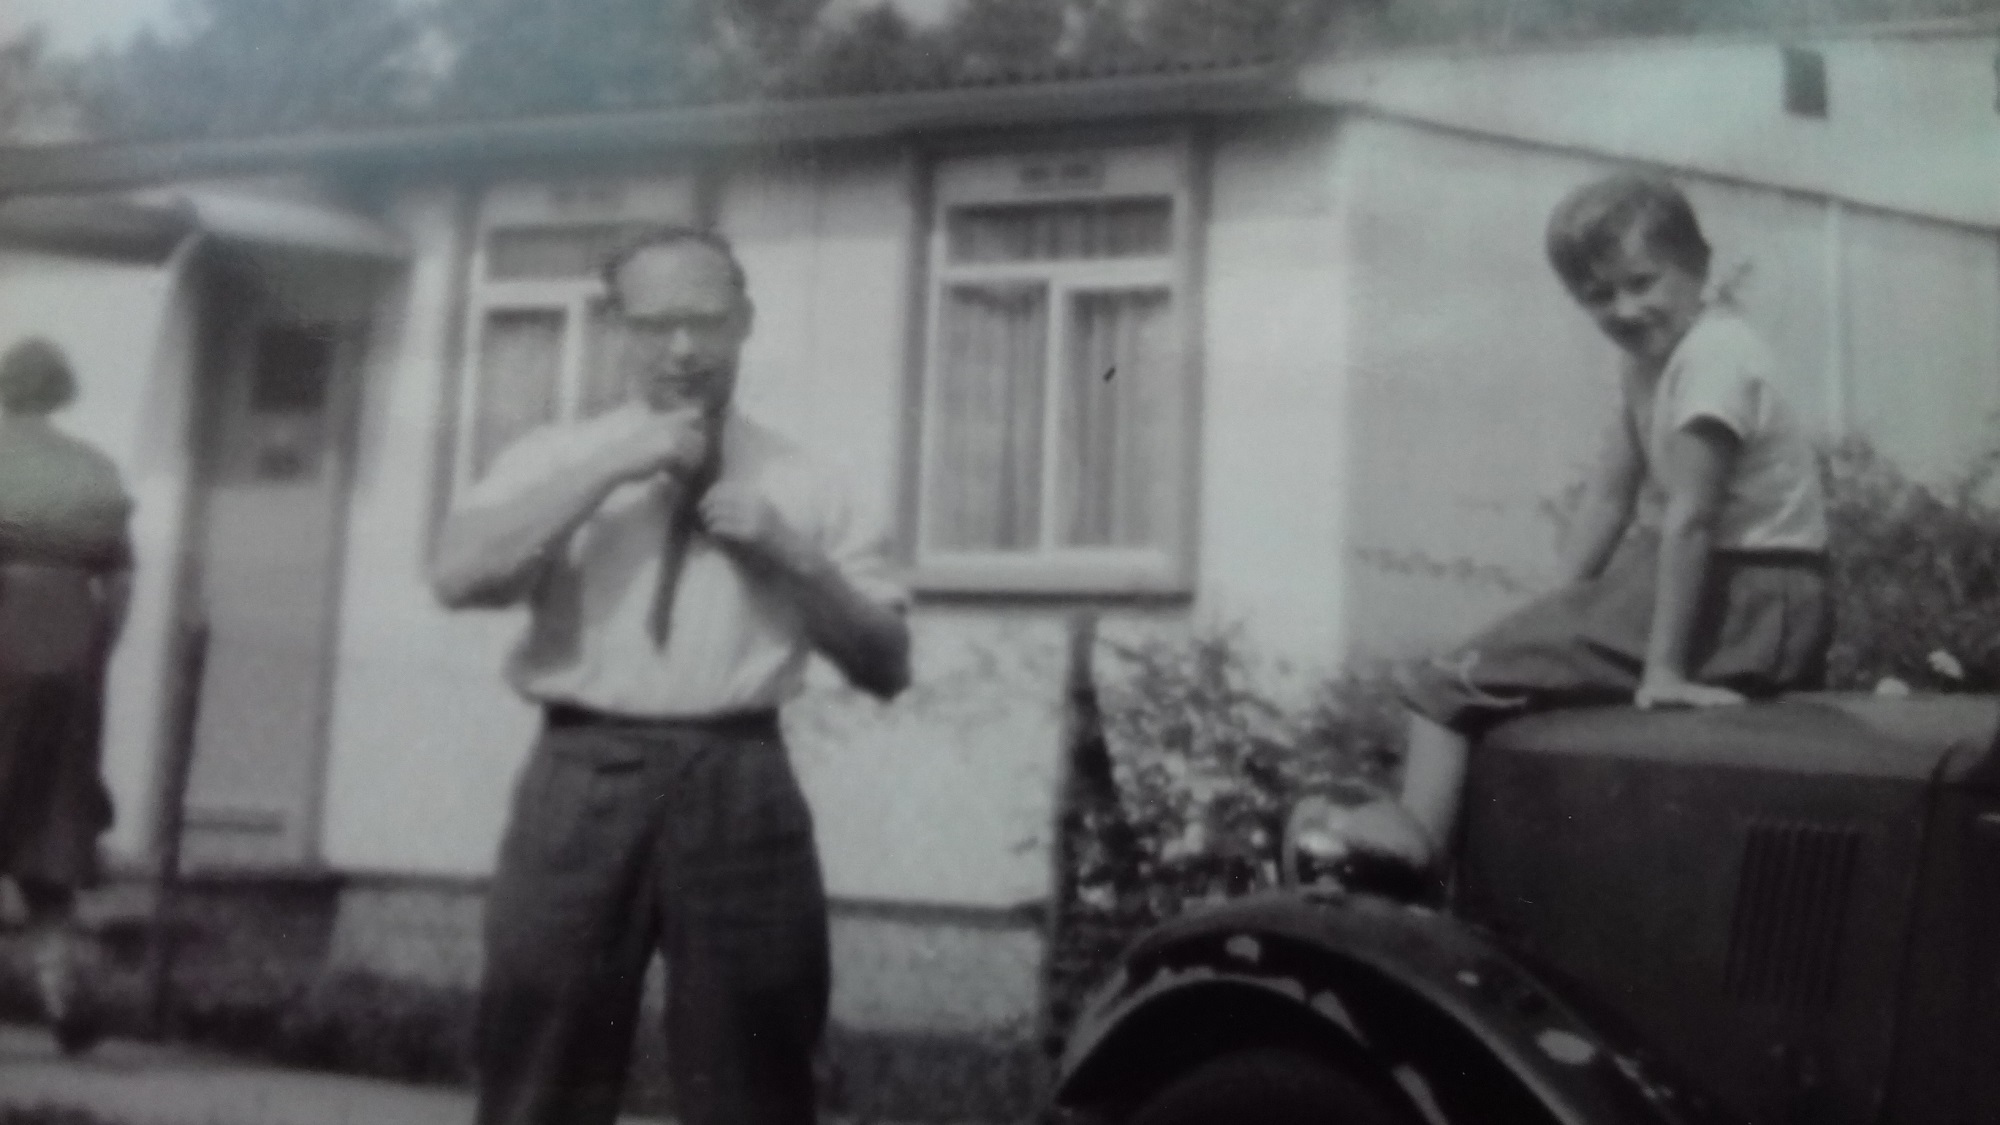 My uncle Dick Cozens with my cousin, his daughter Maureen. 58 Cuddington Way, Cheam